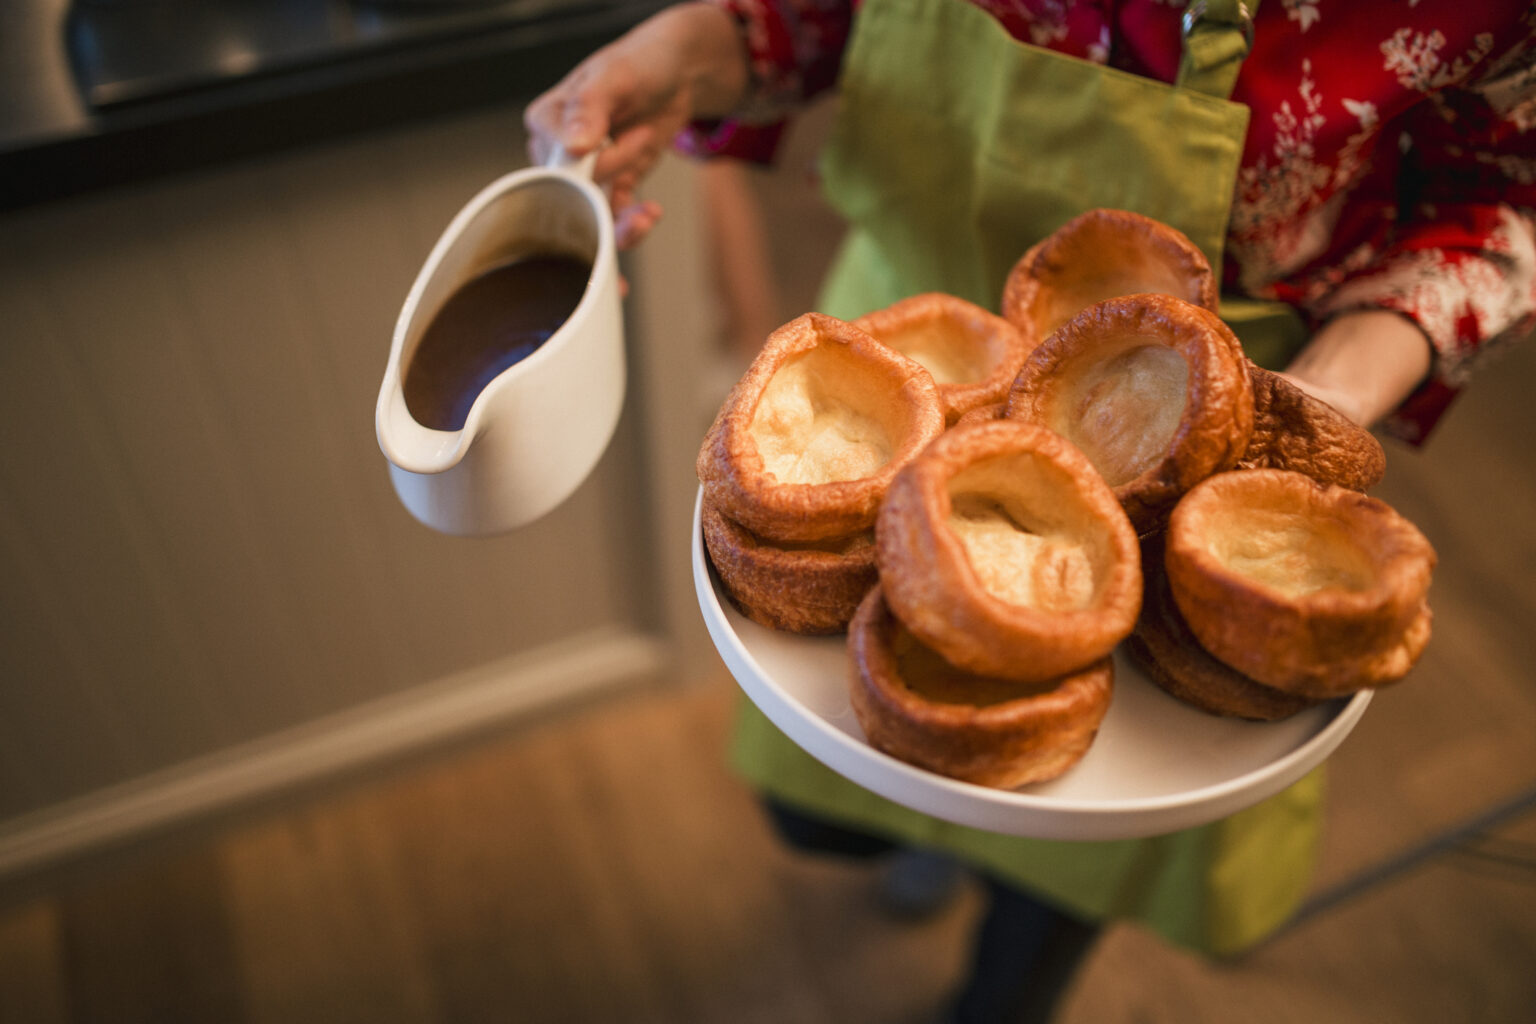 How to make the perfect Yorkshire puddings at home